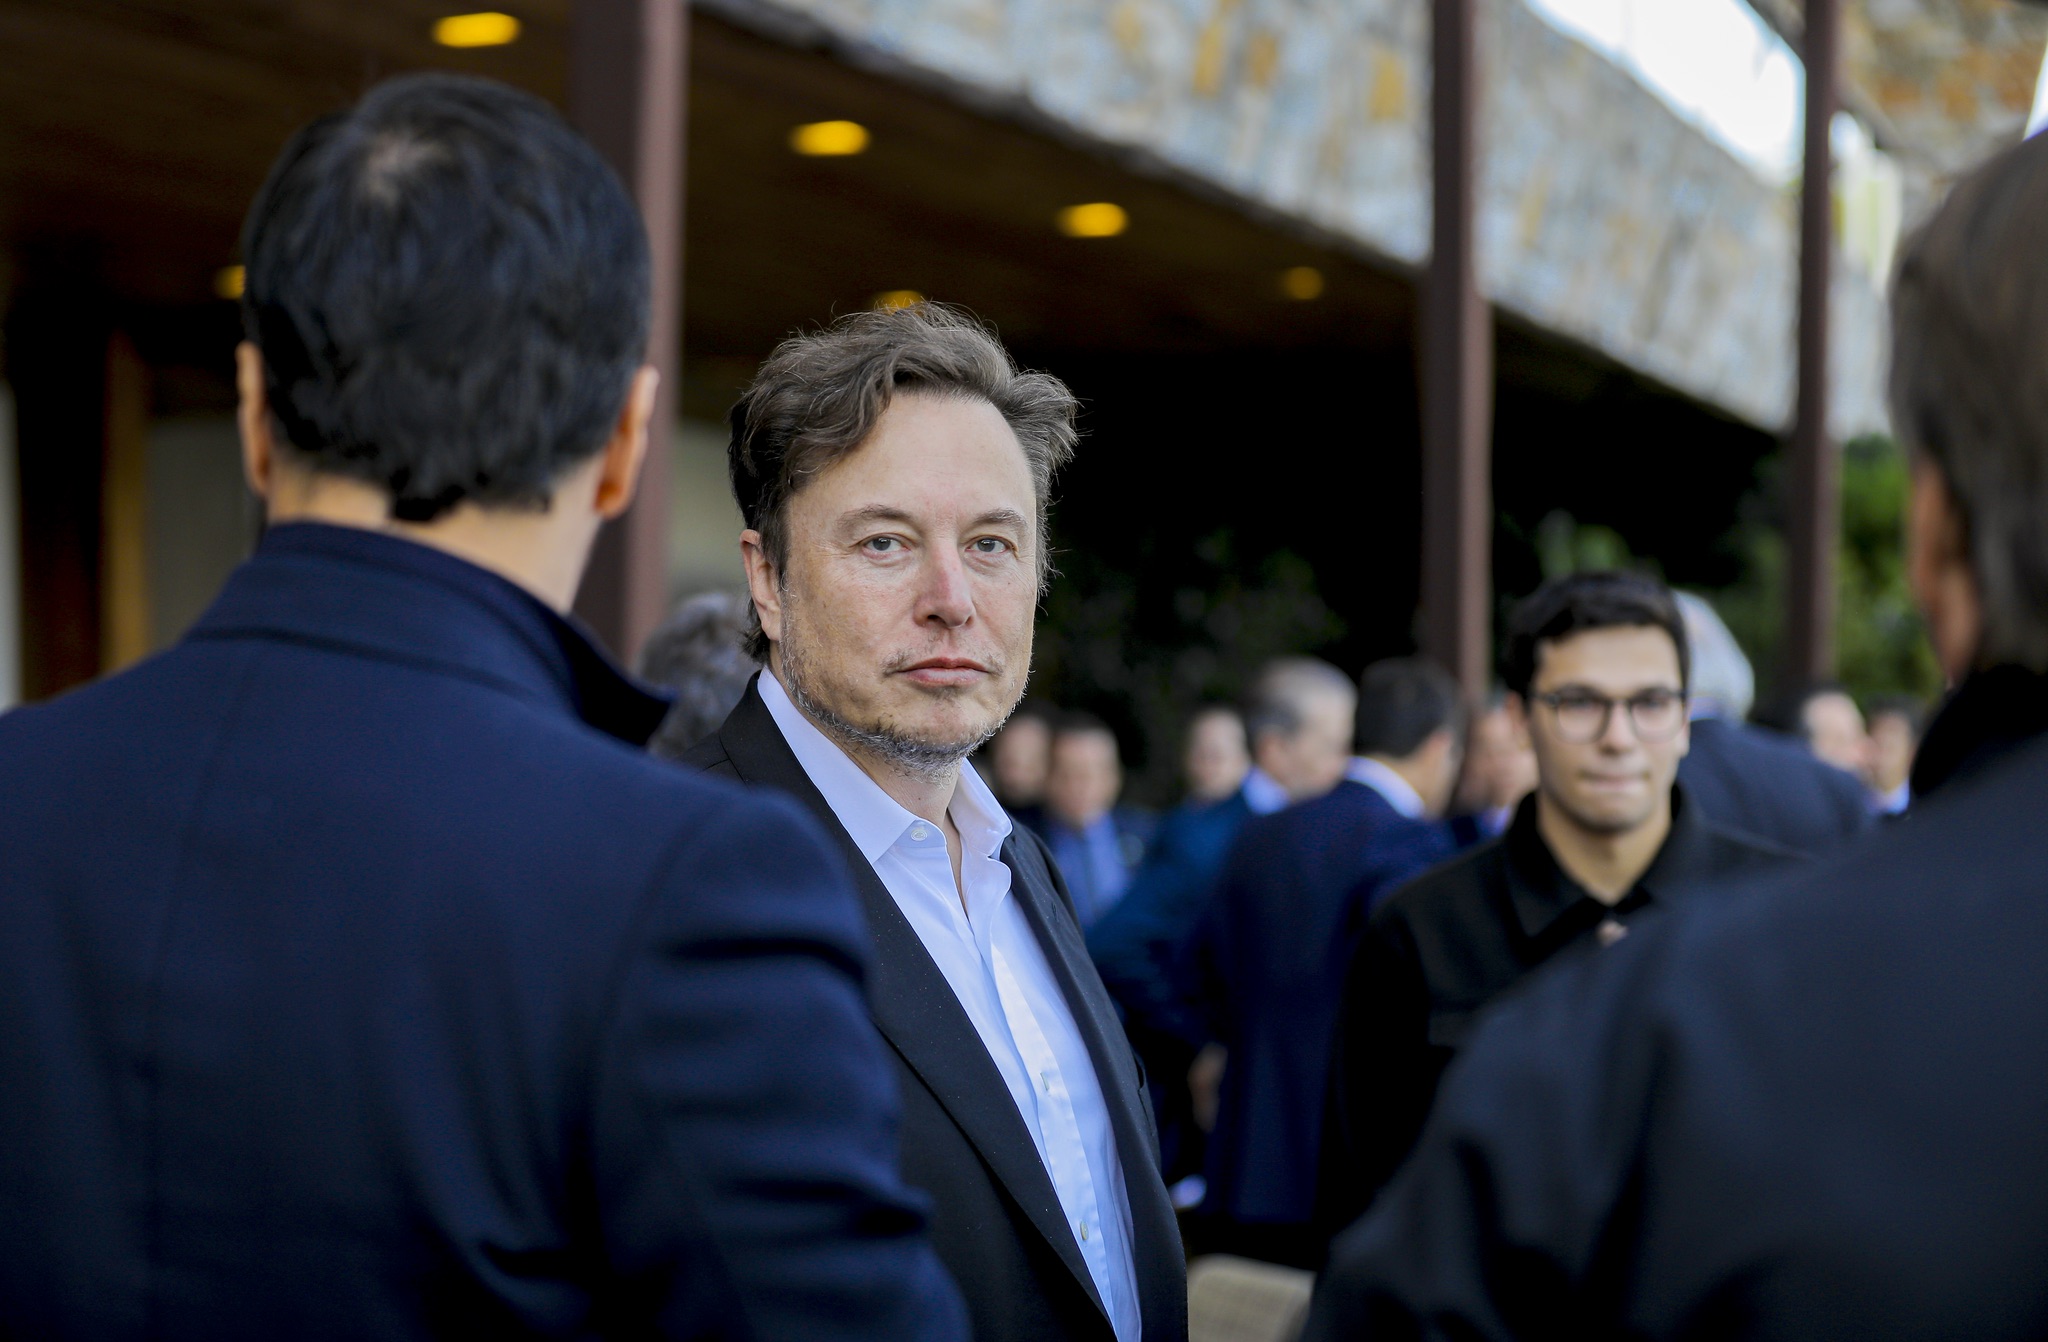 Tesla is pulling out all the stops to get Elon Musk’s $56B pay package approved